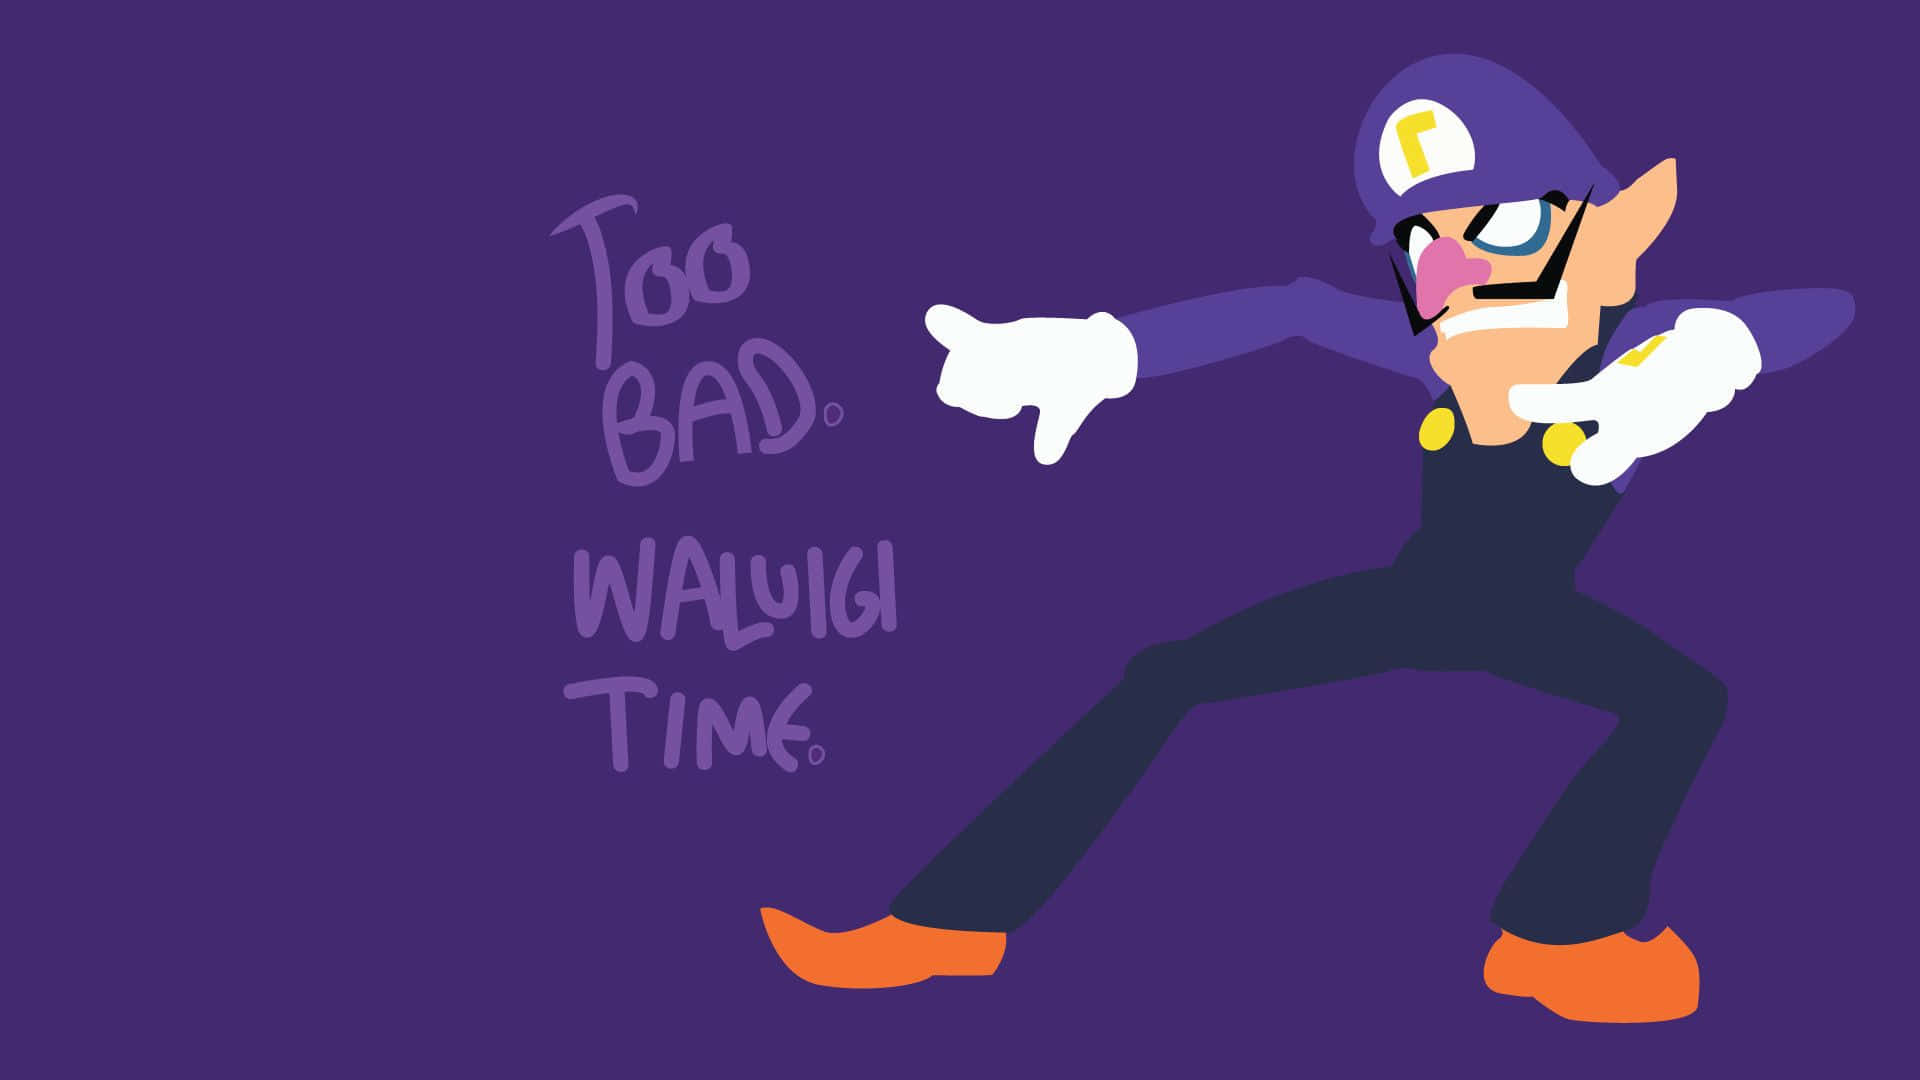 Waluigi Posing In A High-quality 1920x1080 Wallpaper Background